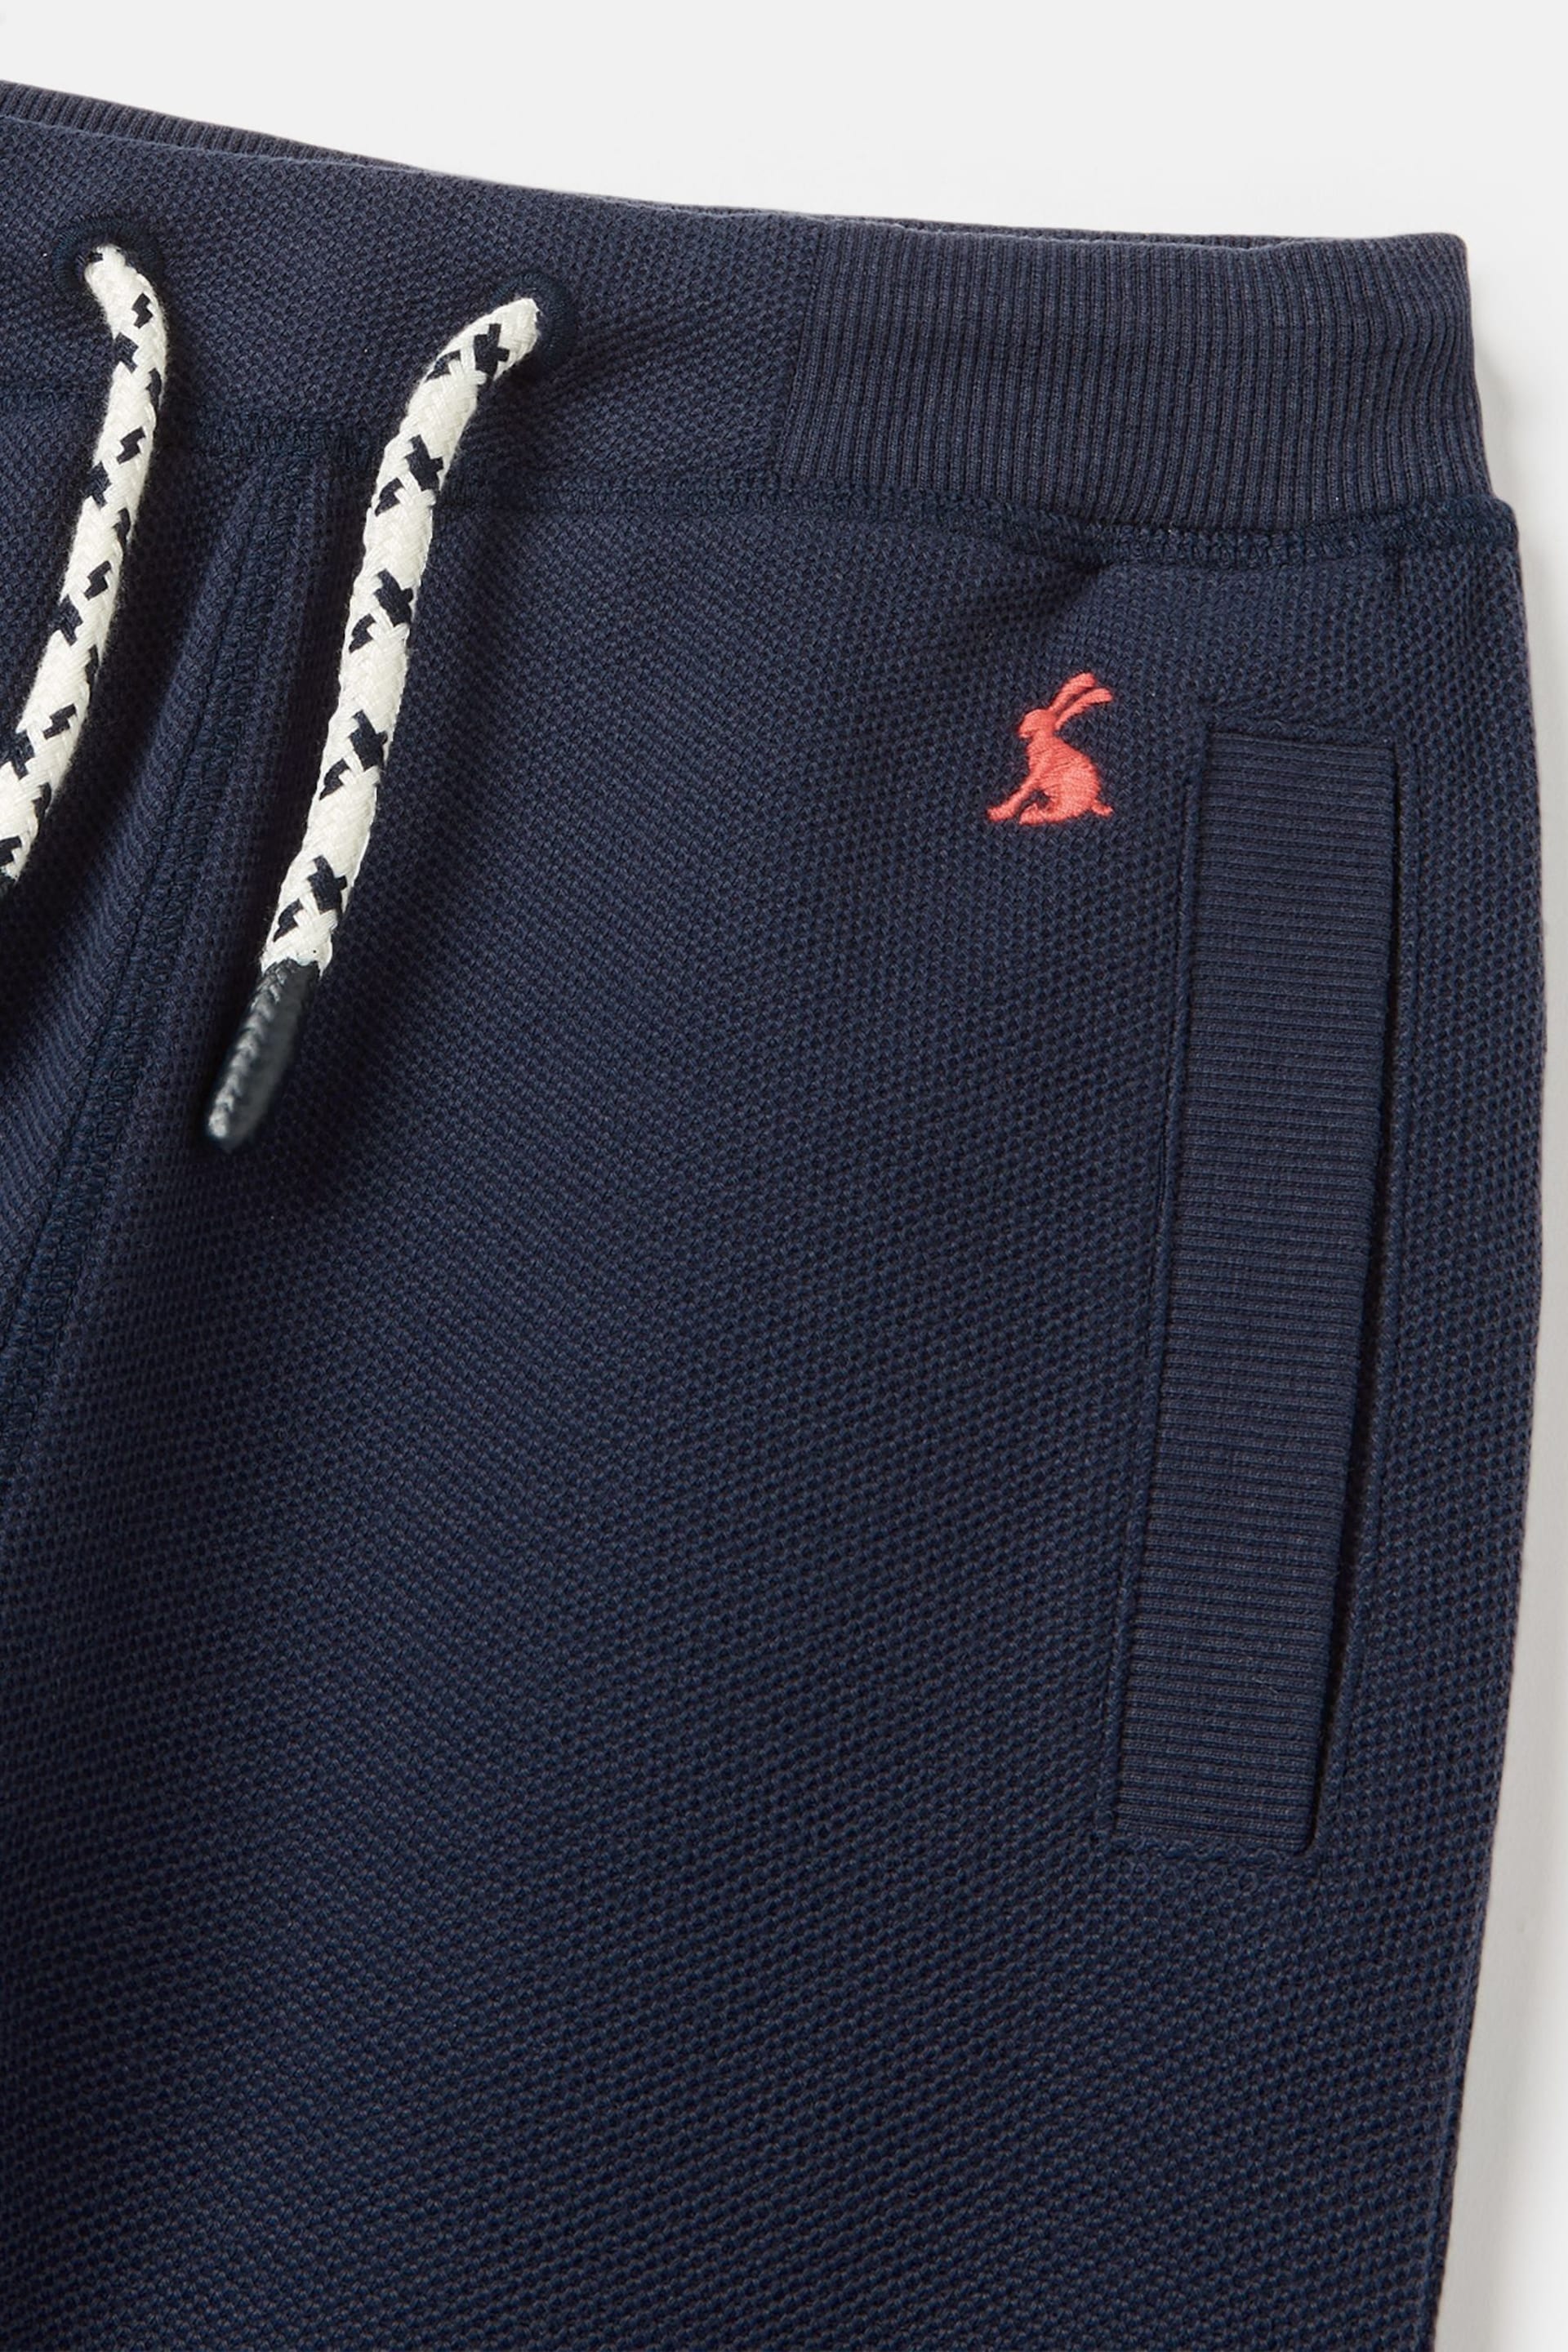 Joules Sid Navy Blue Cotton Joggers - Image 3 of 6